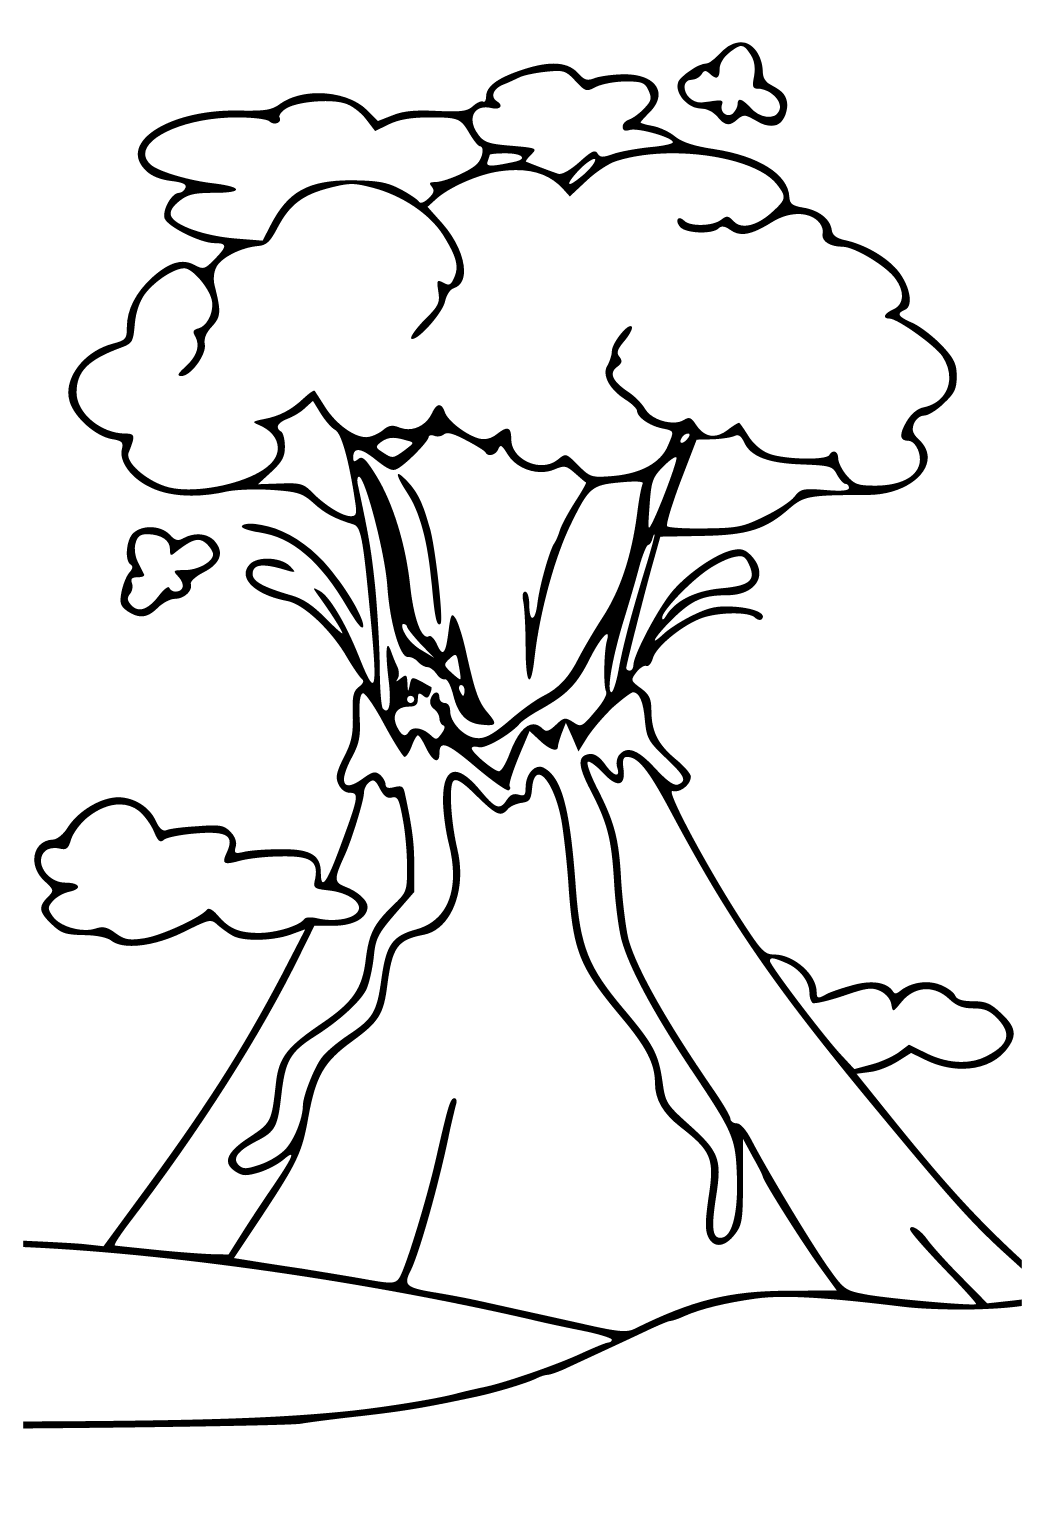 Free printable volcano eruption coloring page for adults and kids